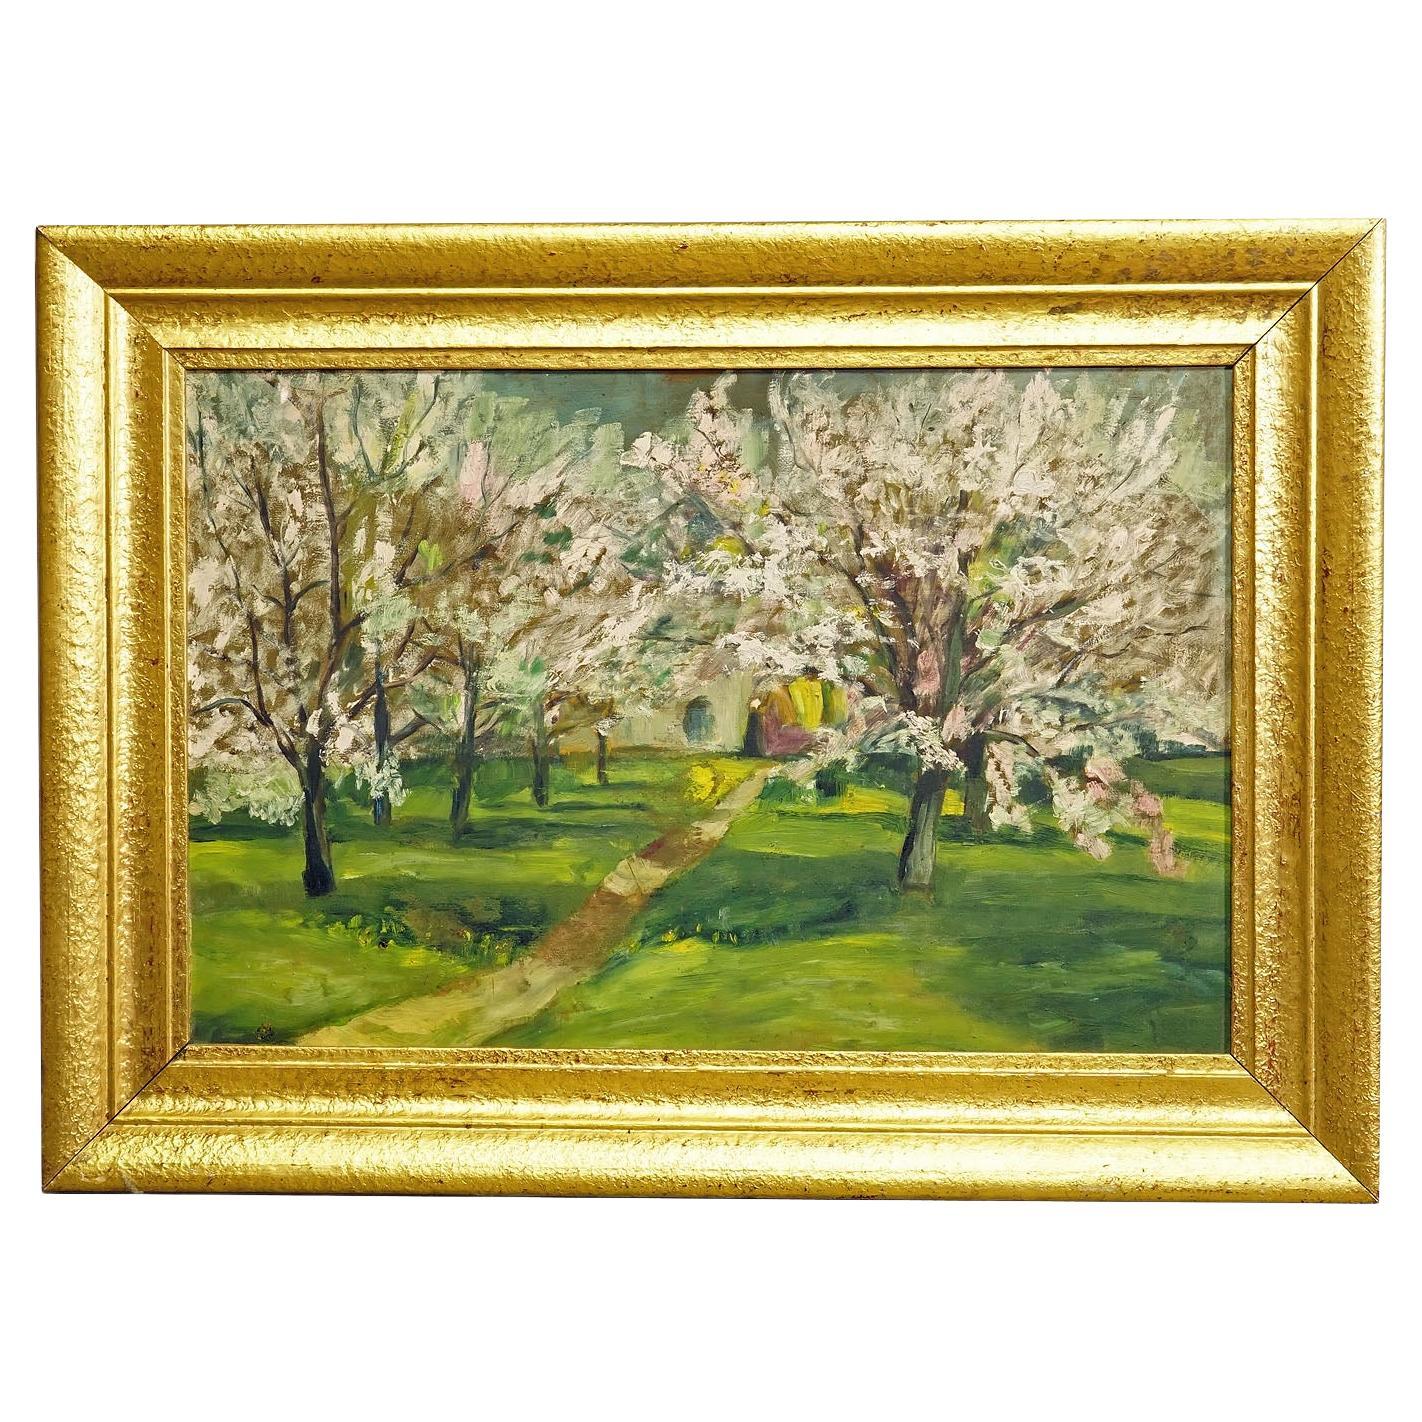 Impressionistic Painting of a Garden with Blossoming Apple Trees